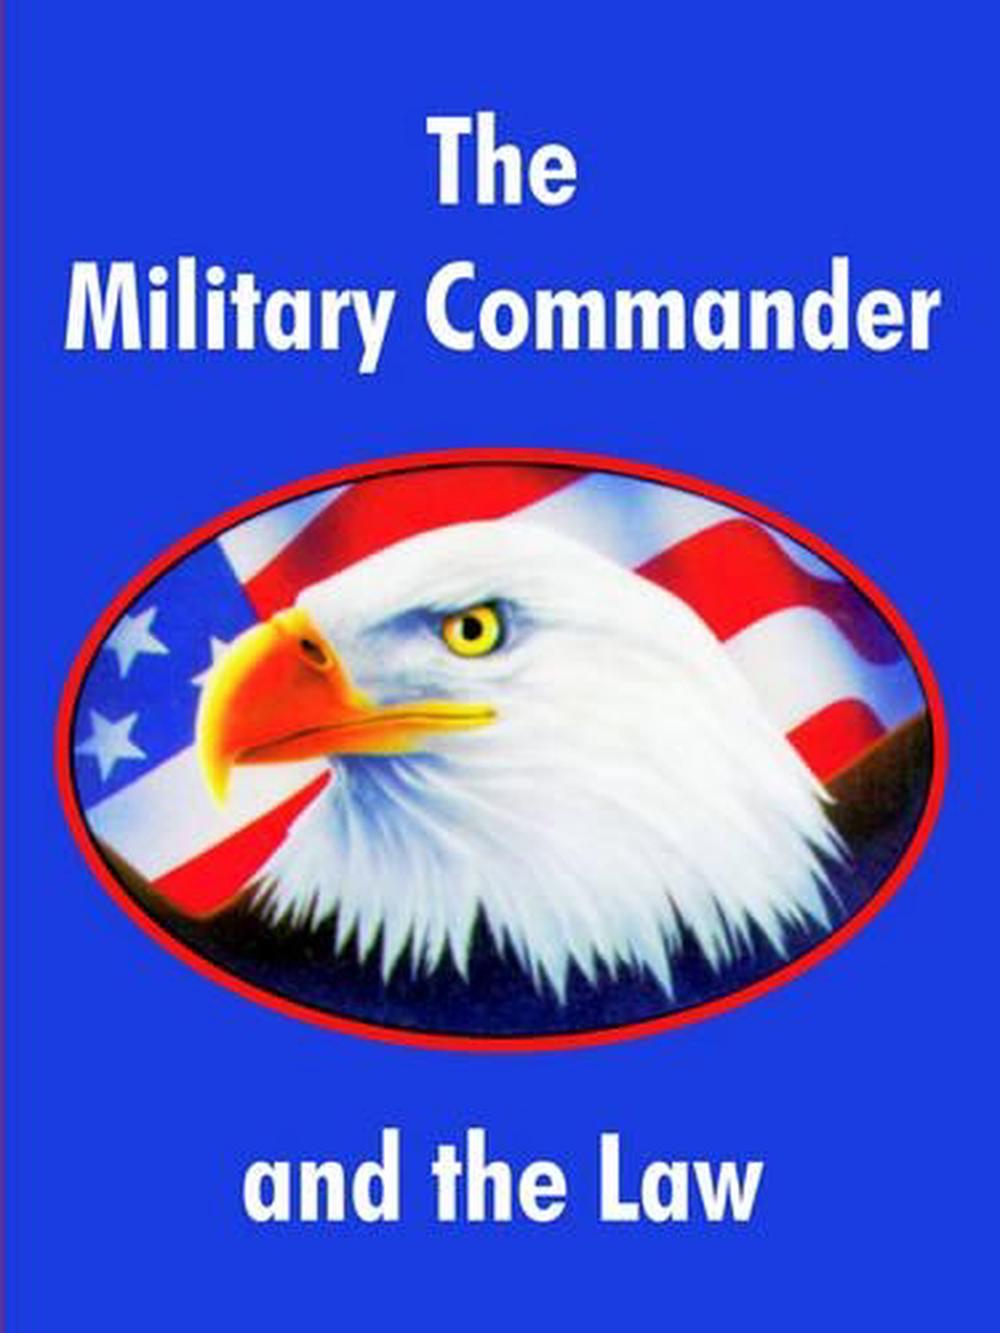 The Military Commander and the Law by Air Force Judge Advocate General